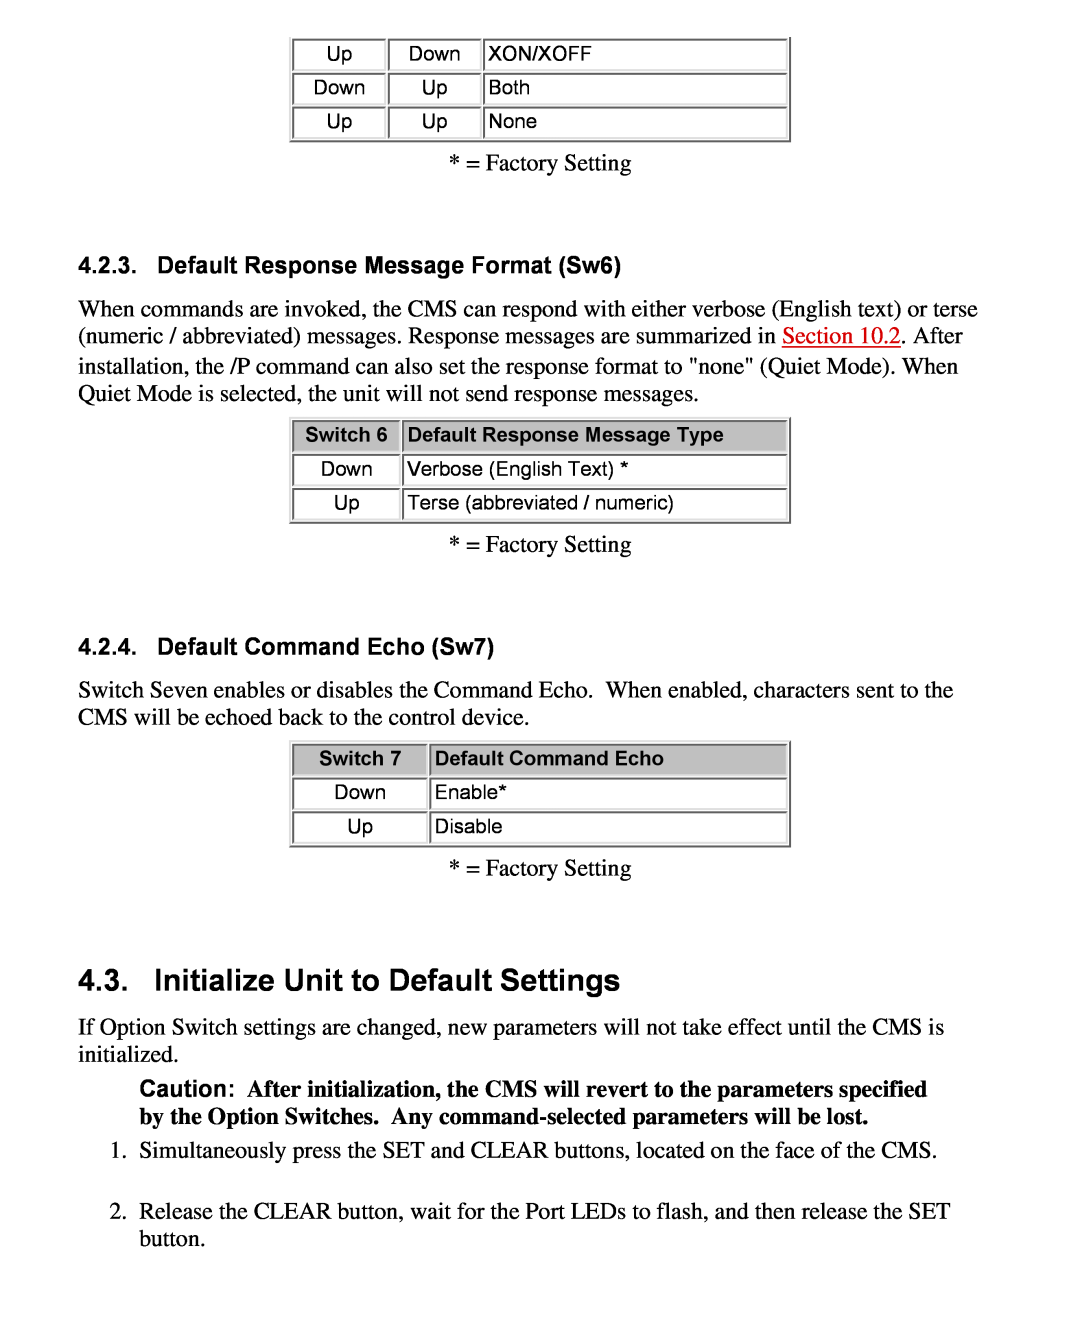 Western Telematic CMS-16 manual Initialize Unit to Default Settings, Default Response Message Format Sw6 